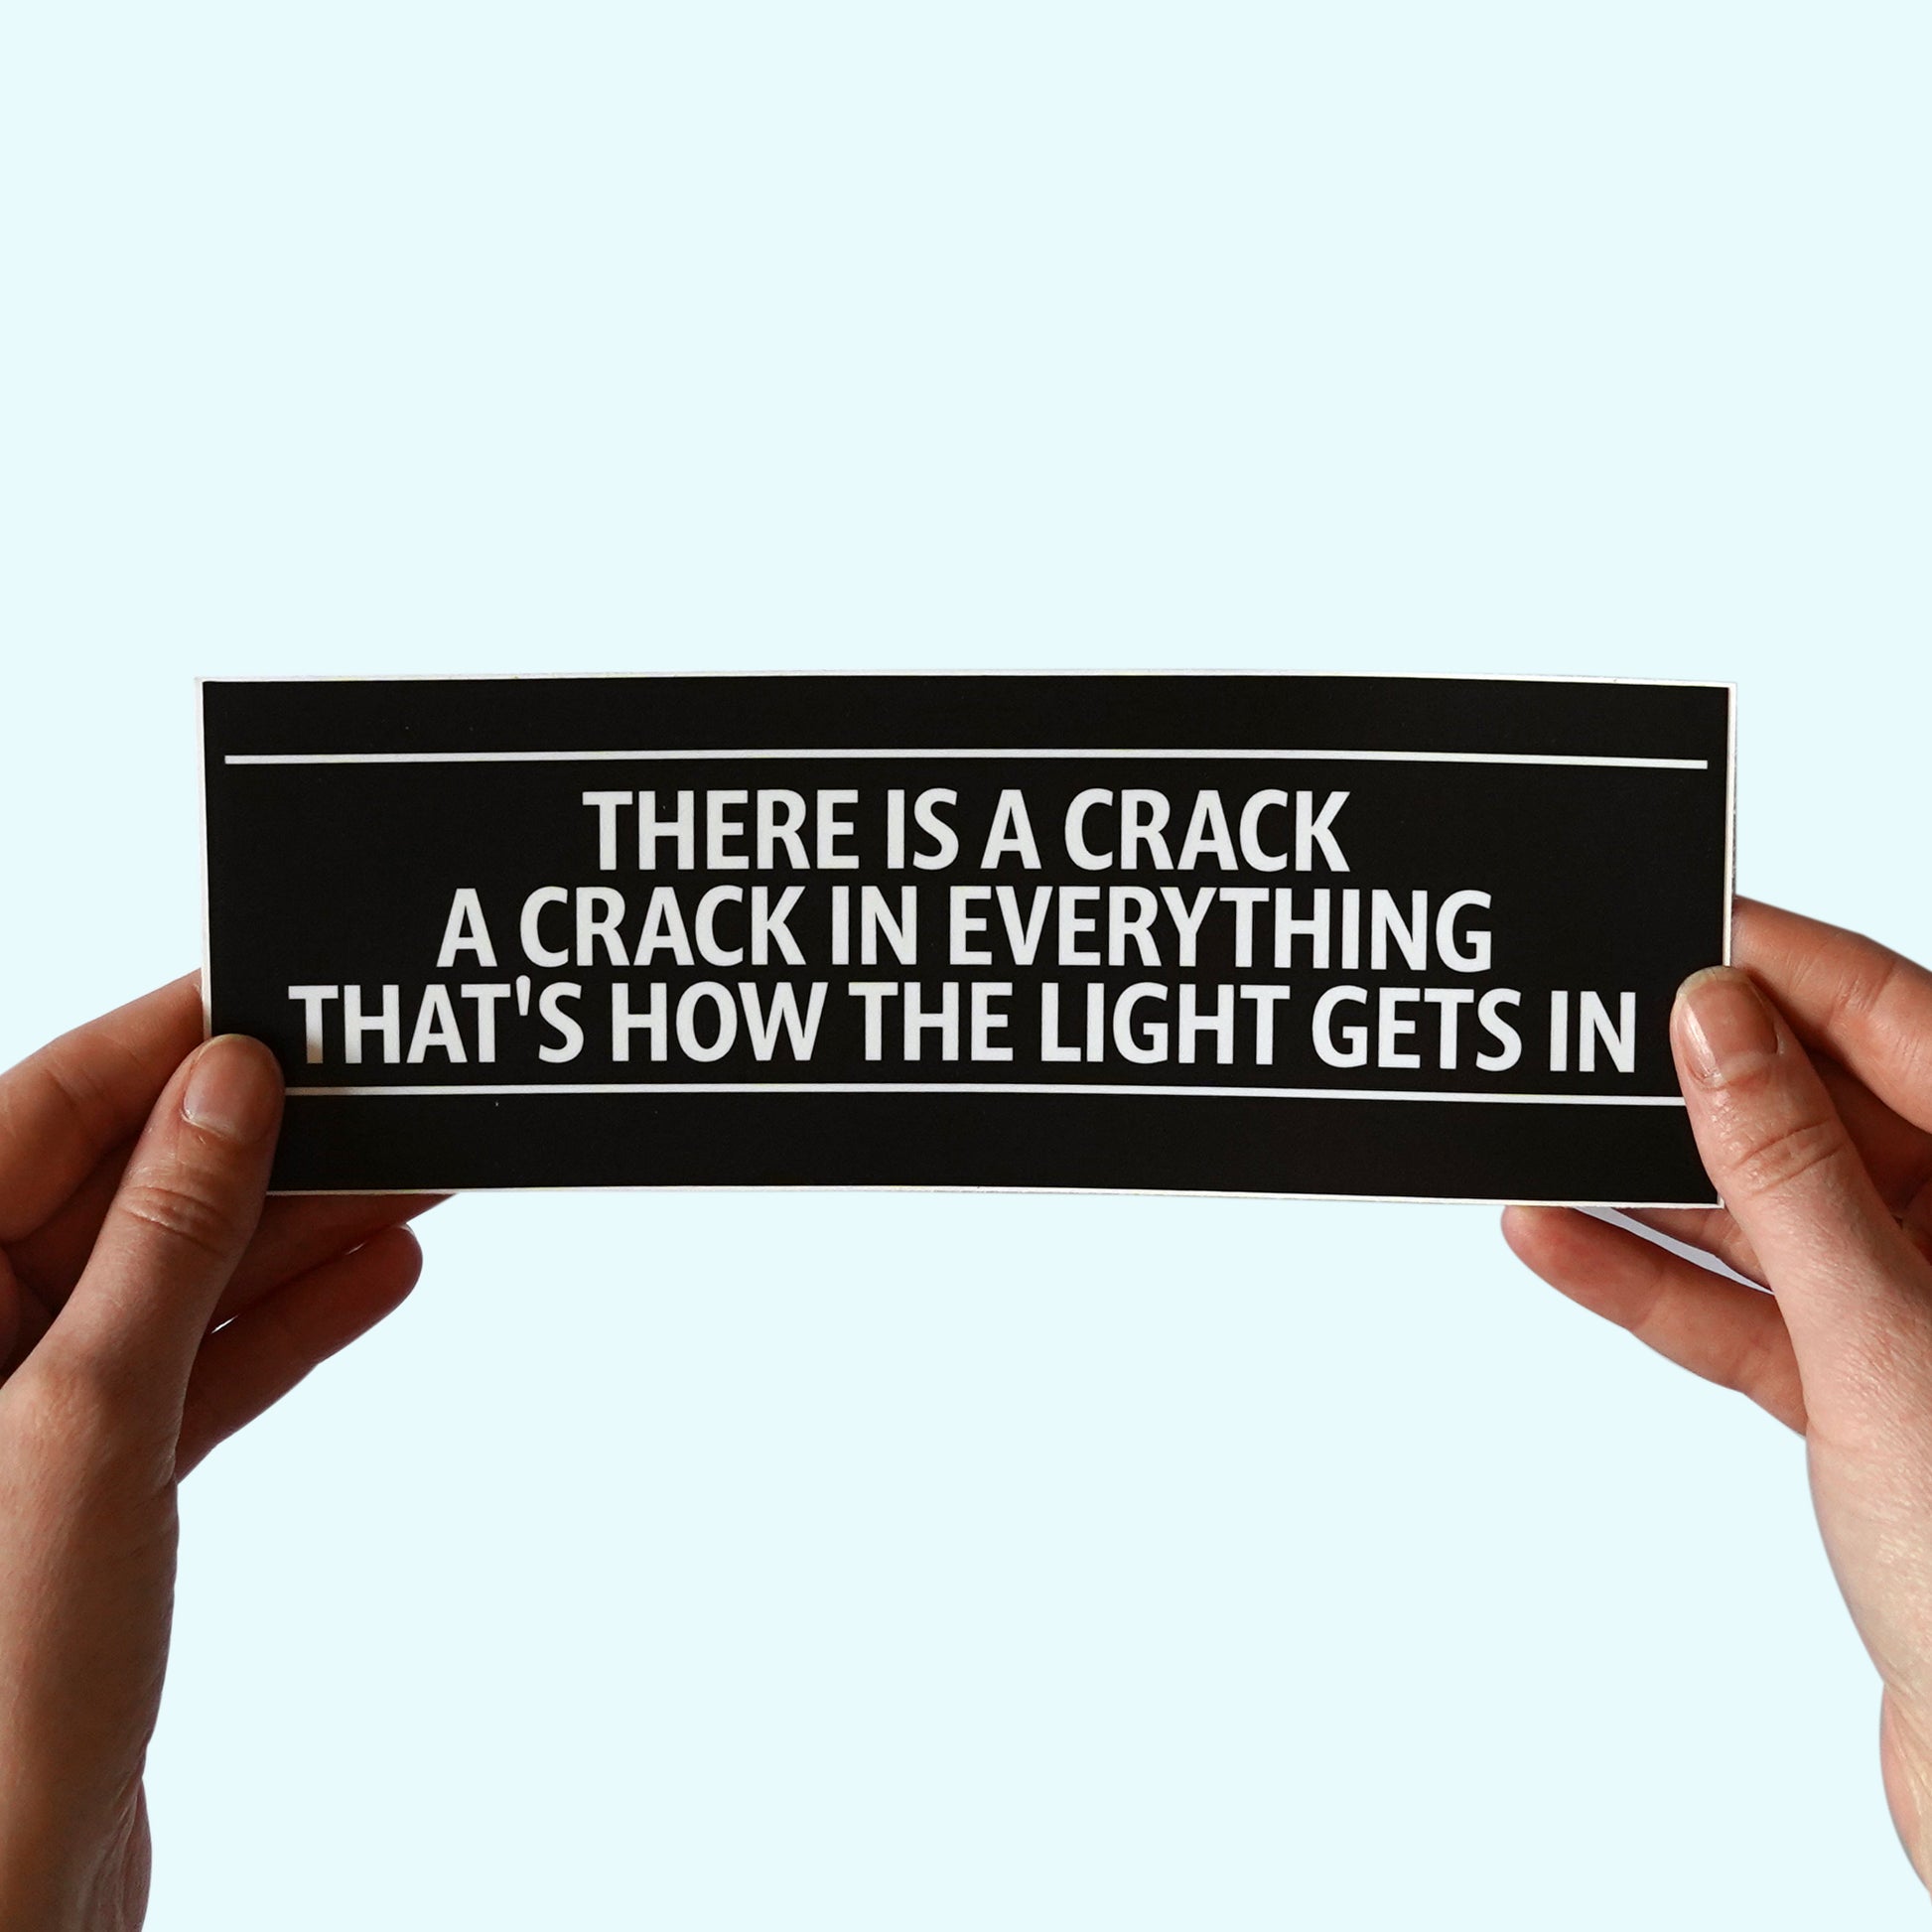 Leonard Cohen 'Anthem' Lyric Sticker ...There is a crack, a crack in everything That's how the light gets in...